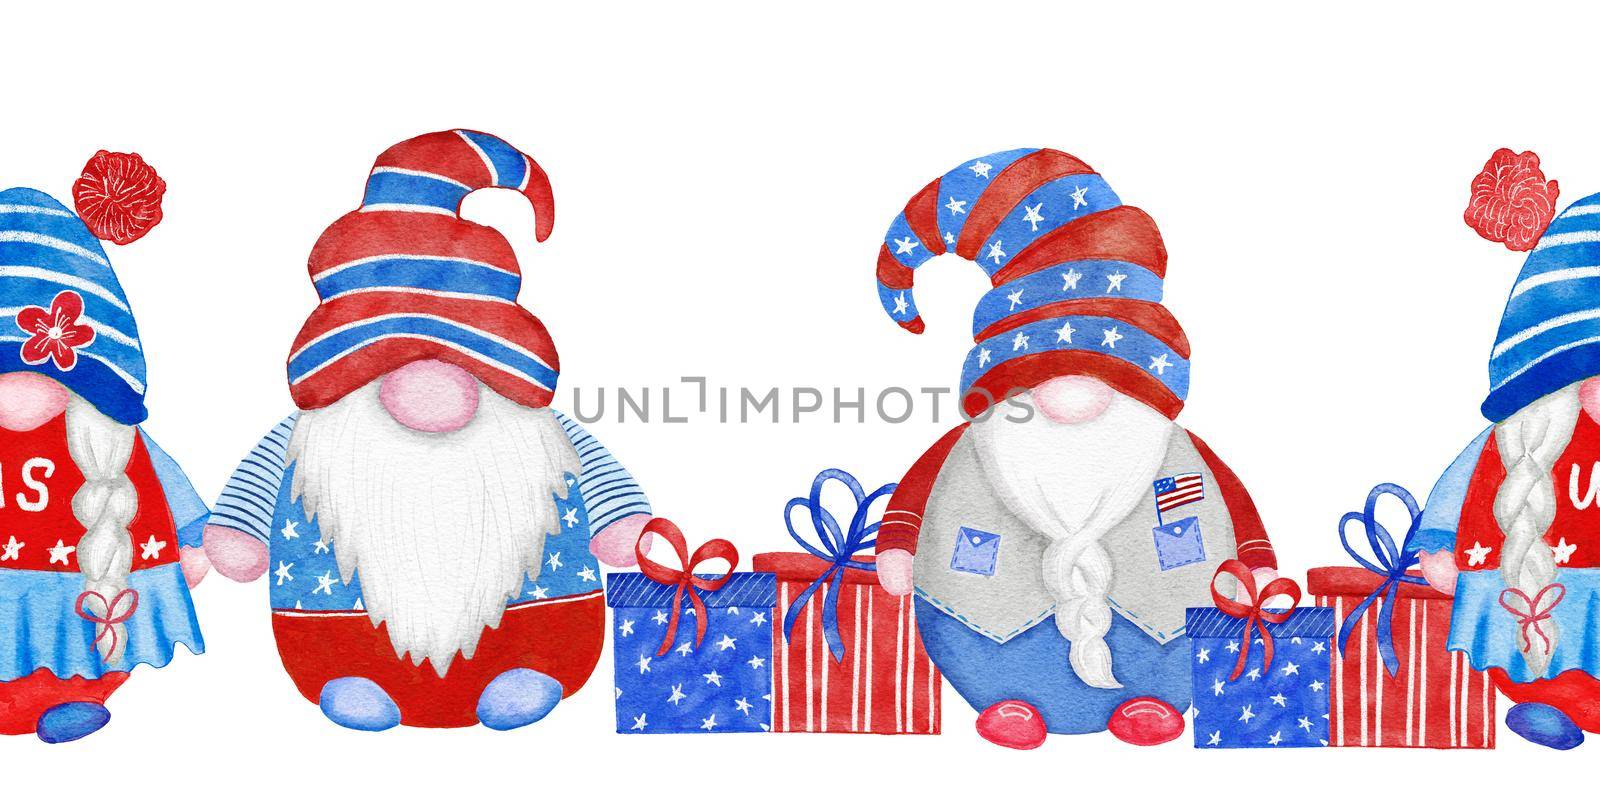 Watercolor seamless hand drawn horizontal border with 4th of July gnomes, Forth of july patriotic American design with nordic gnomes in blue red white hats balloons gifts. US celebration print